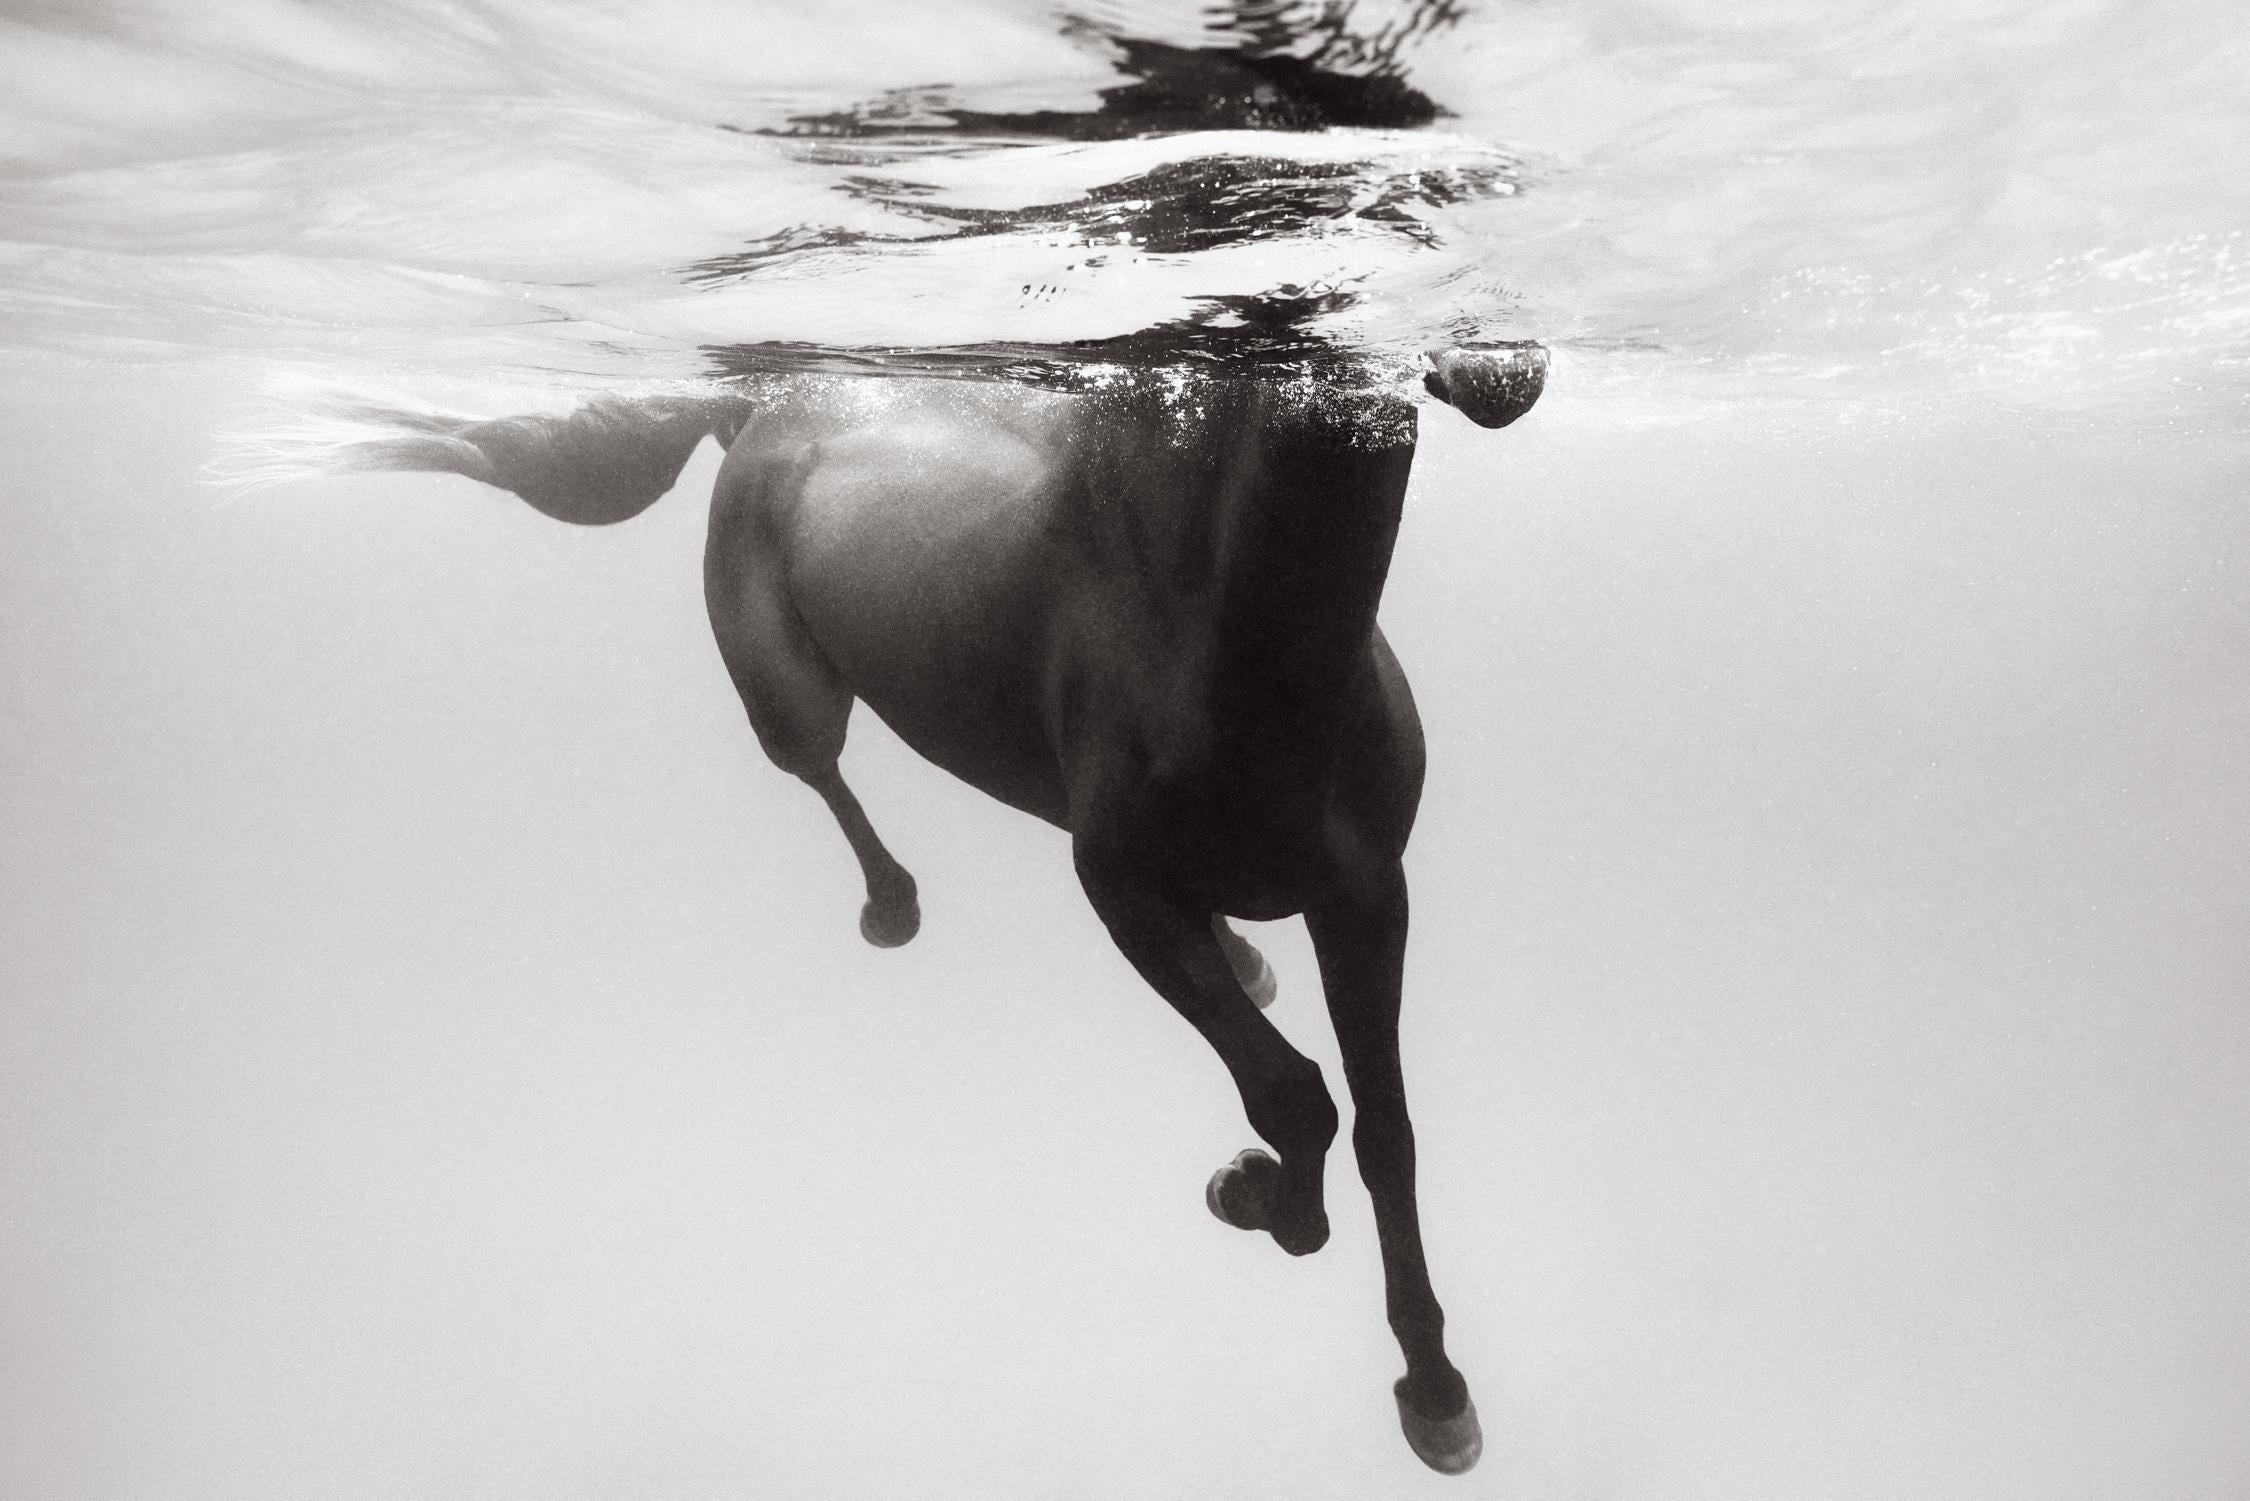 Drew Doggett Black and White Photograph - Dark Horse Swimming in Clear Water, Design & Fashion-Inspired, Equestrian